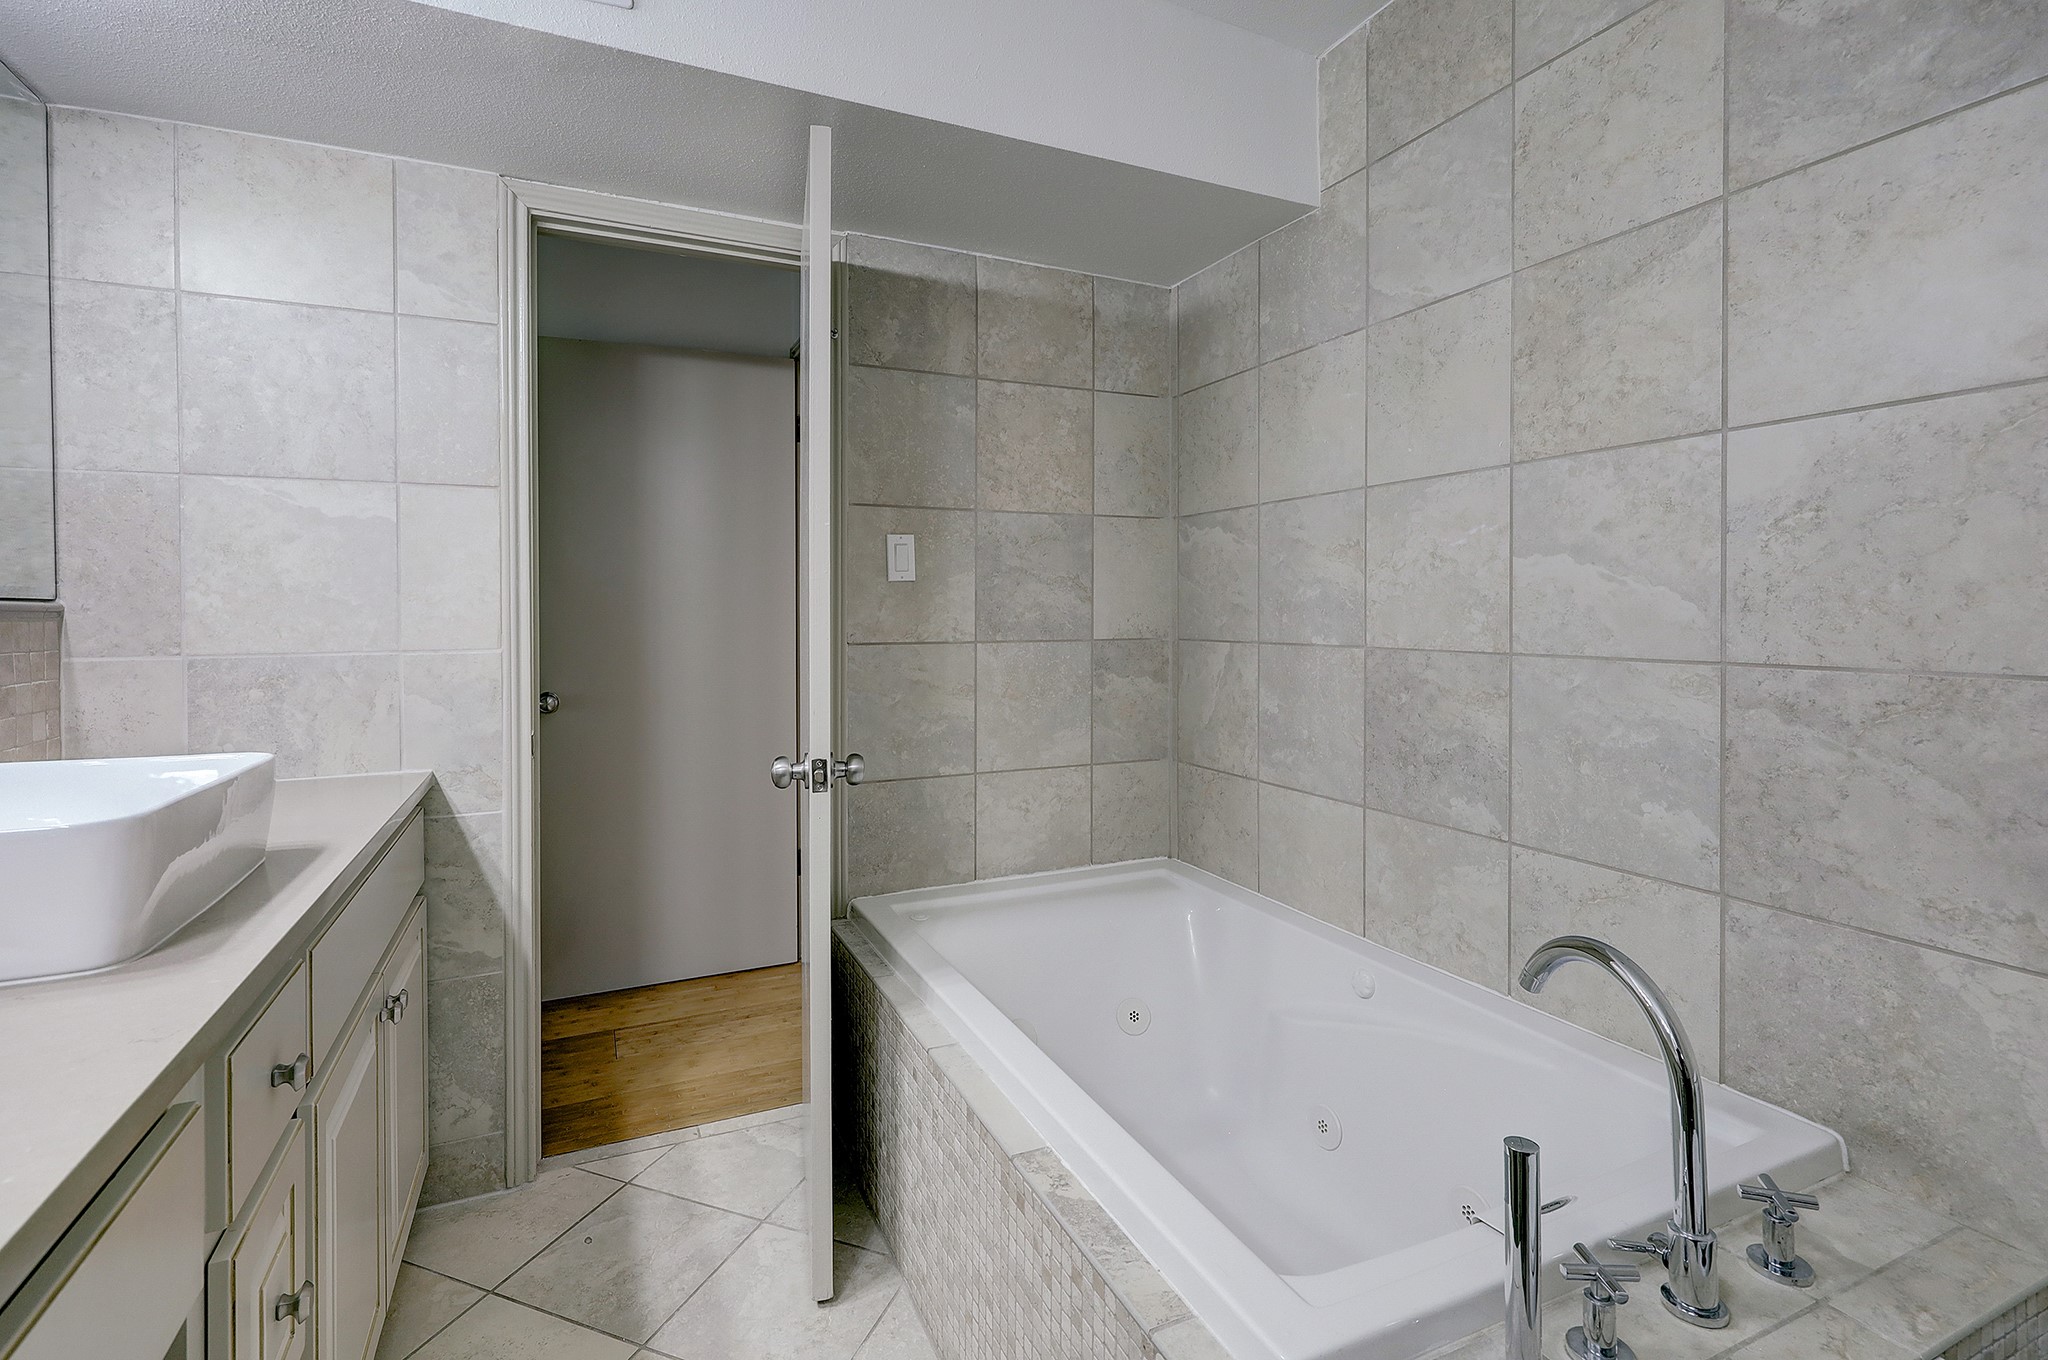 A jetted tub offers the perfect place to relax after a long day.